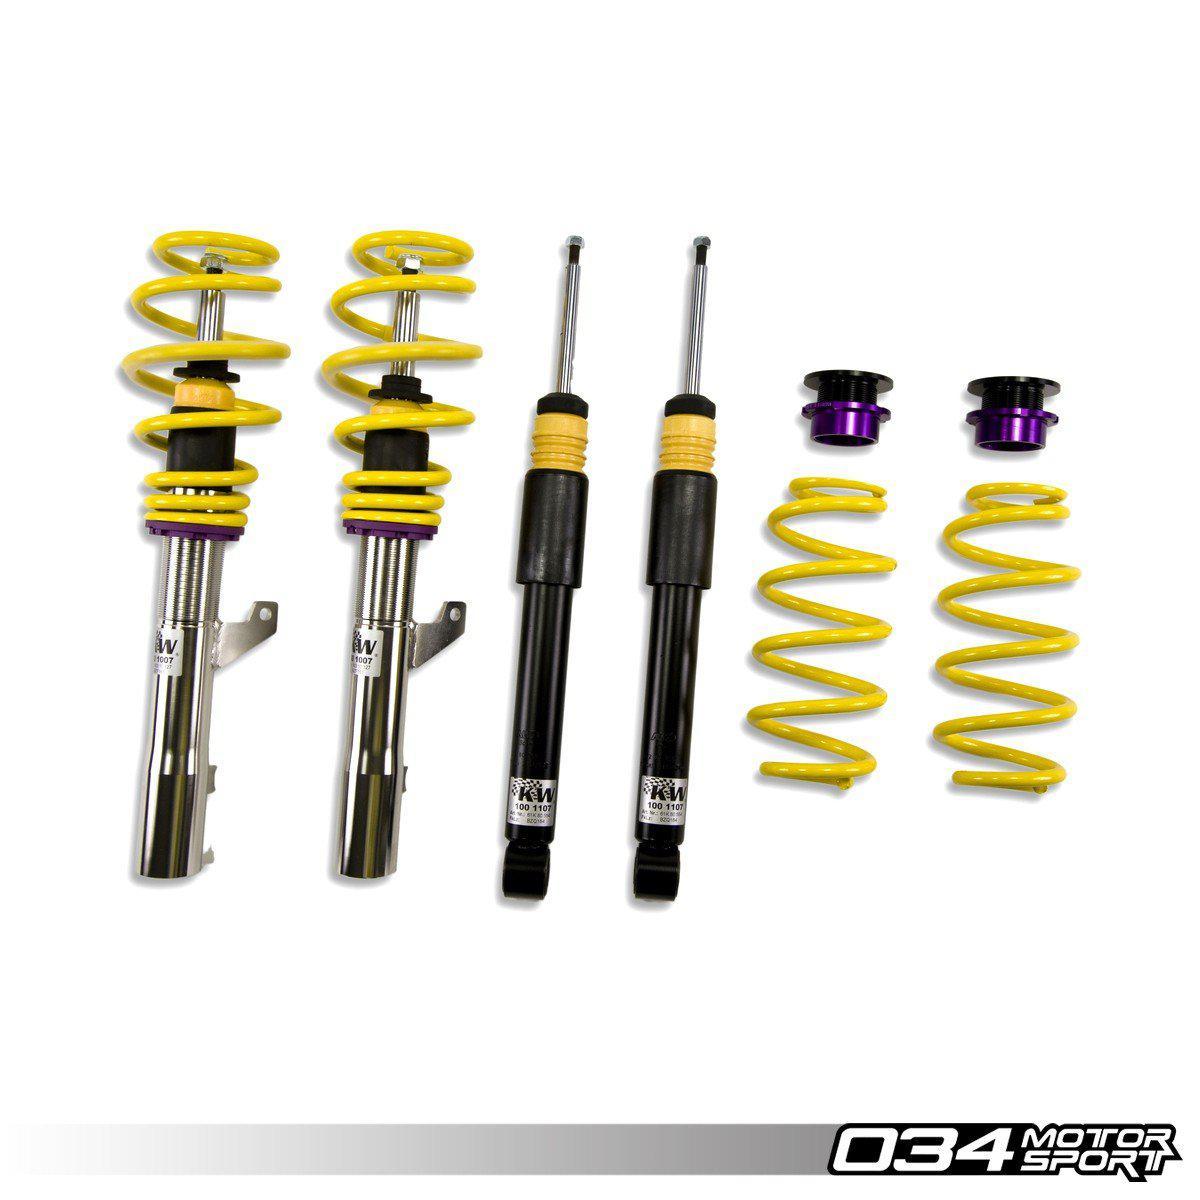 KW Variant 3 Coilover Suspension, 8p Audi A3 Quattro &amp; B6/B7 Volkswagen Passat Without Edc-A Little Tuning Co